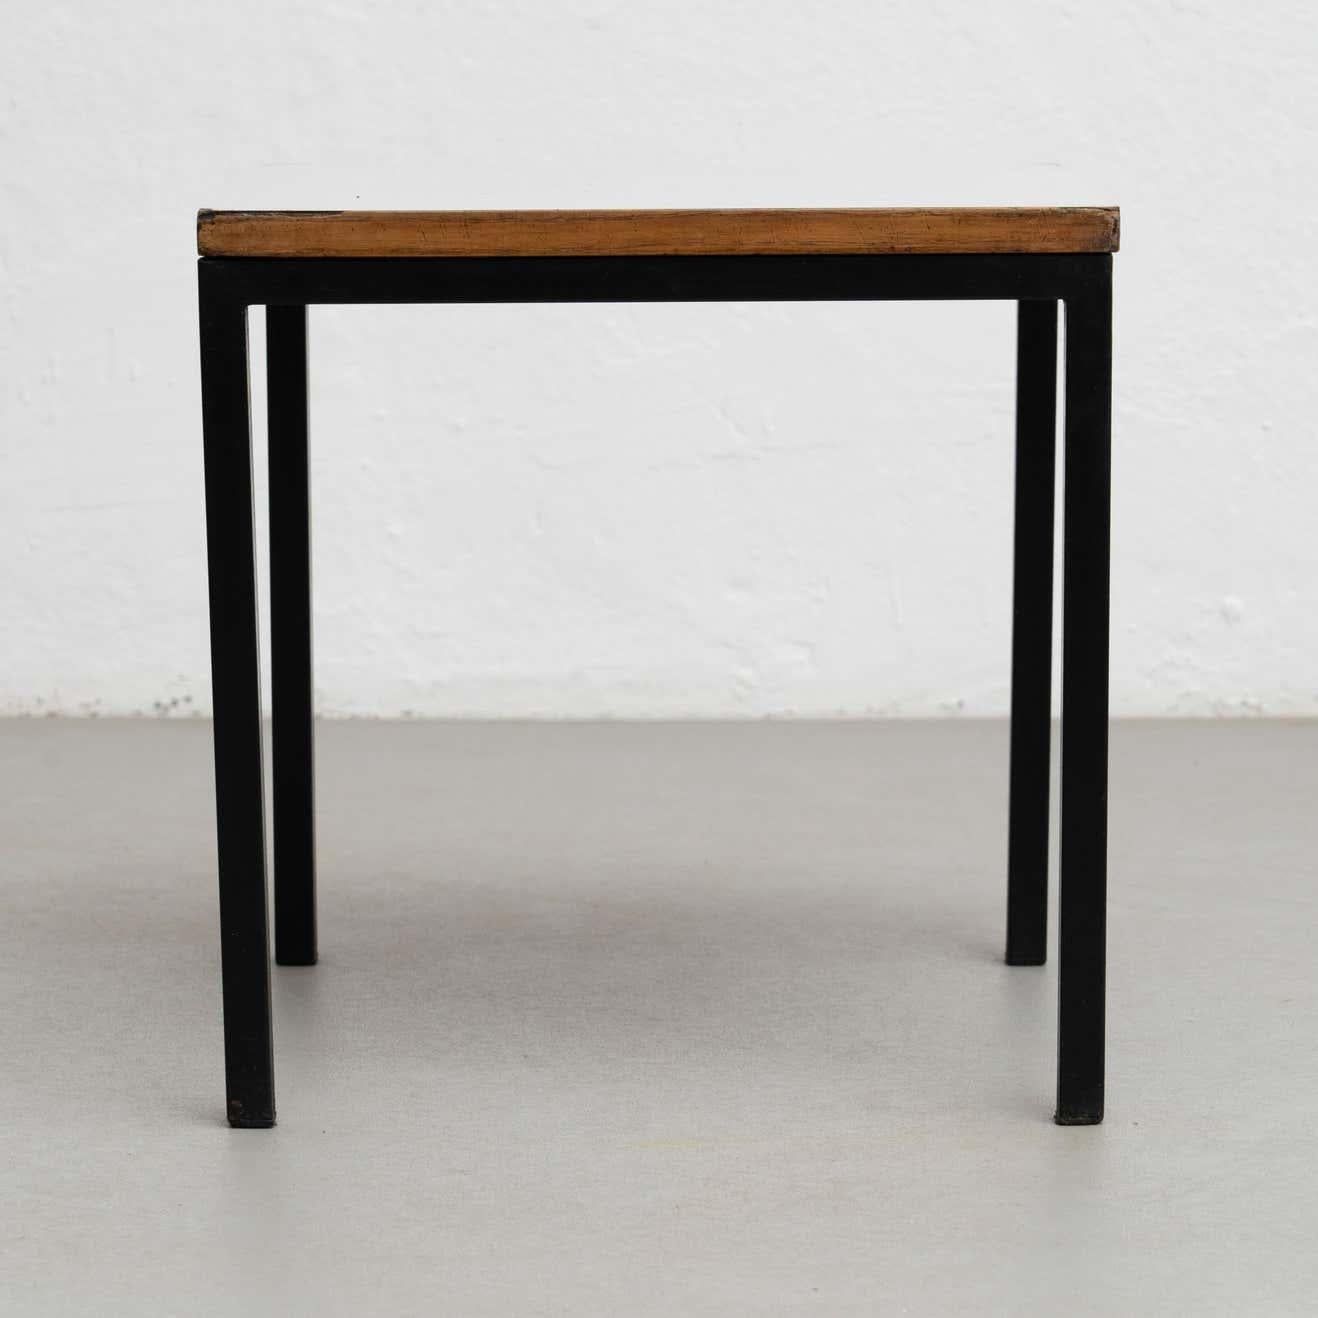 Laminated Charlotte Perriand Metal, Wood and Formica Table for Cansado, circa 1950 For Sale